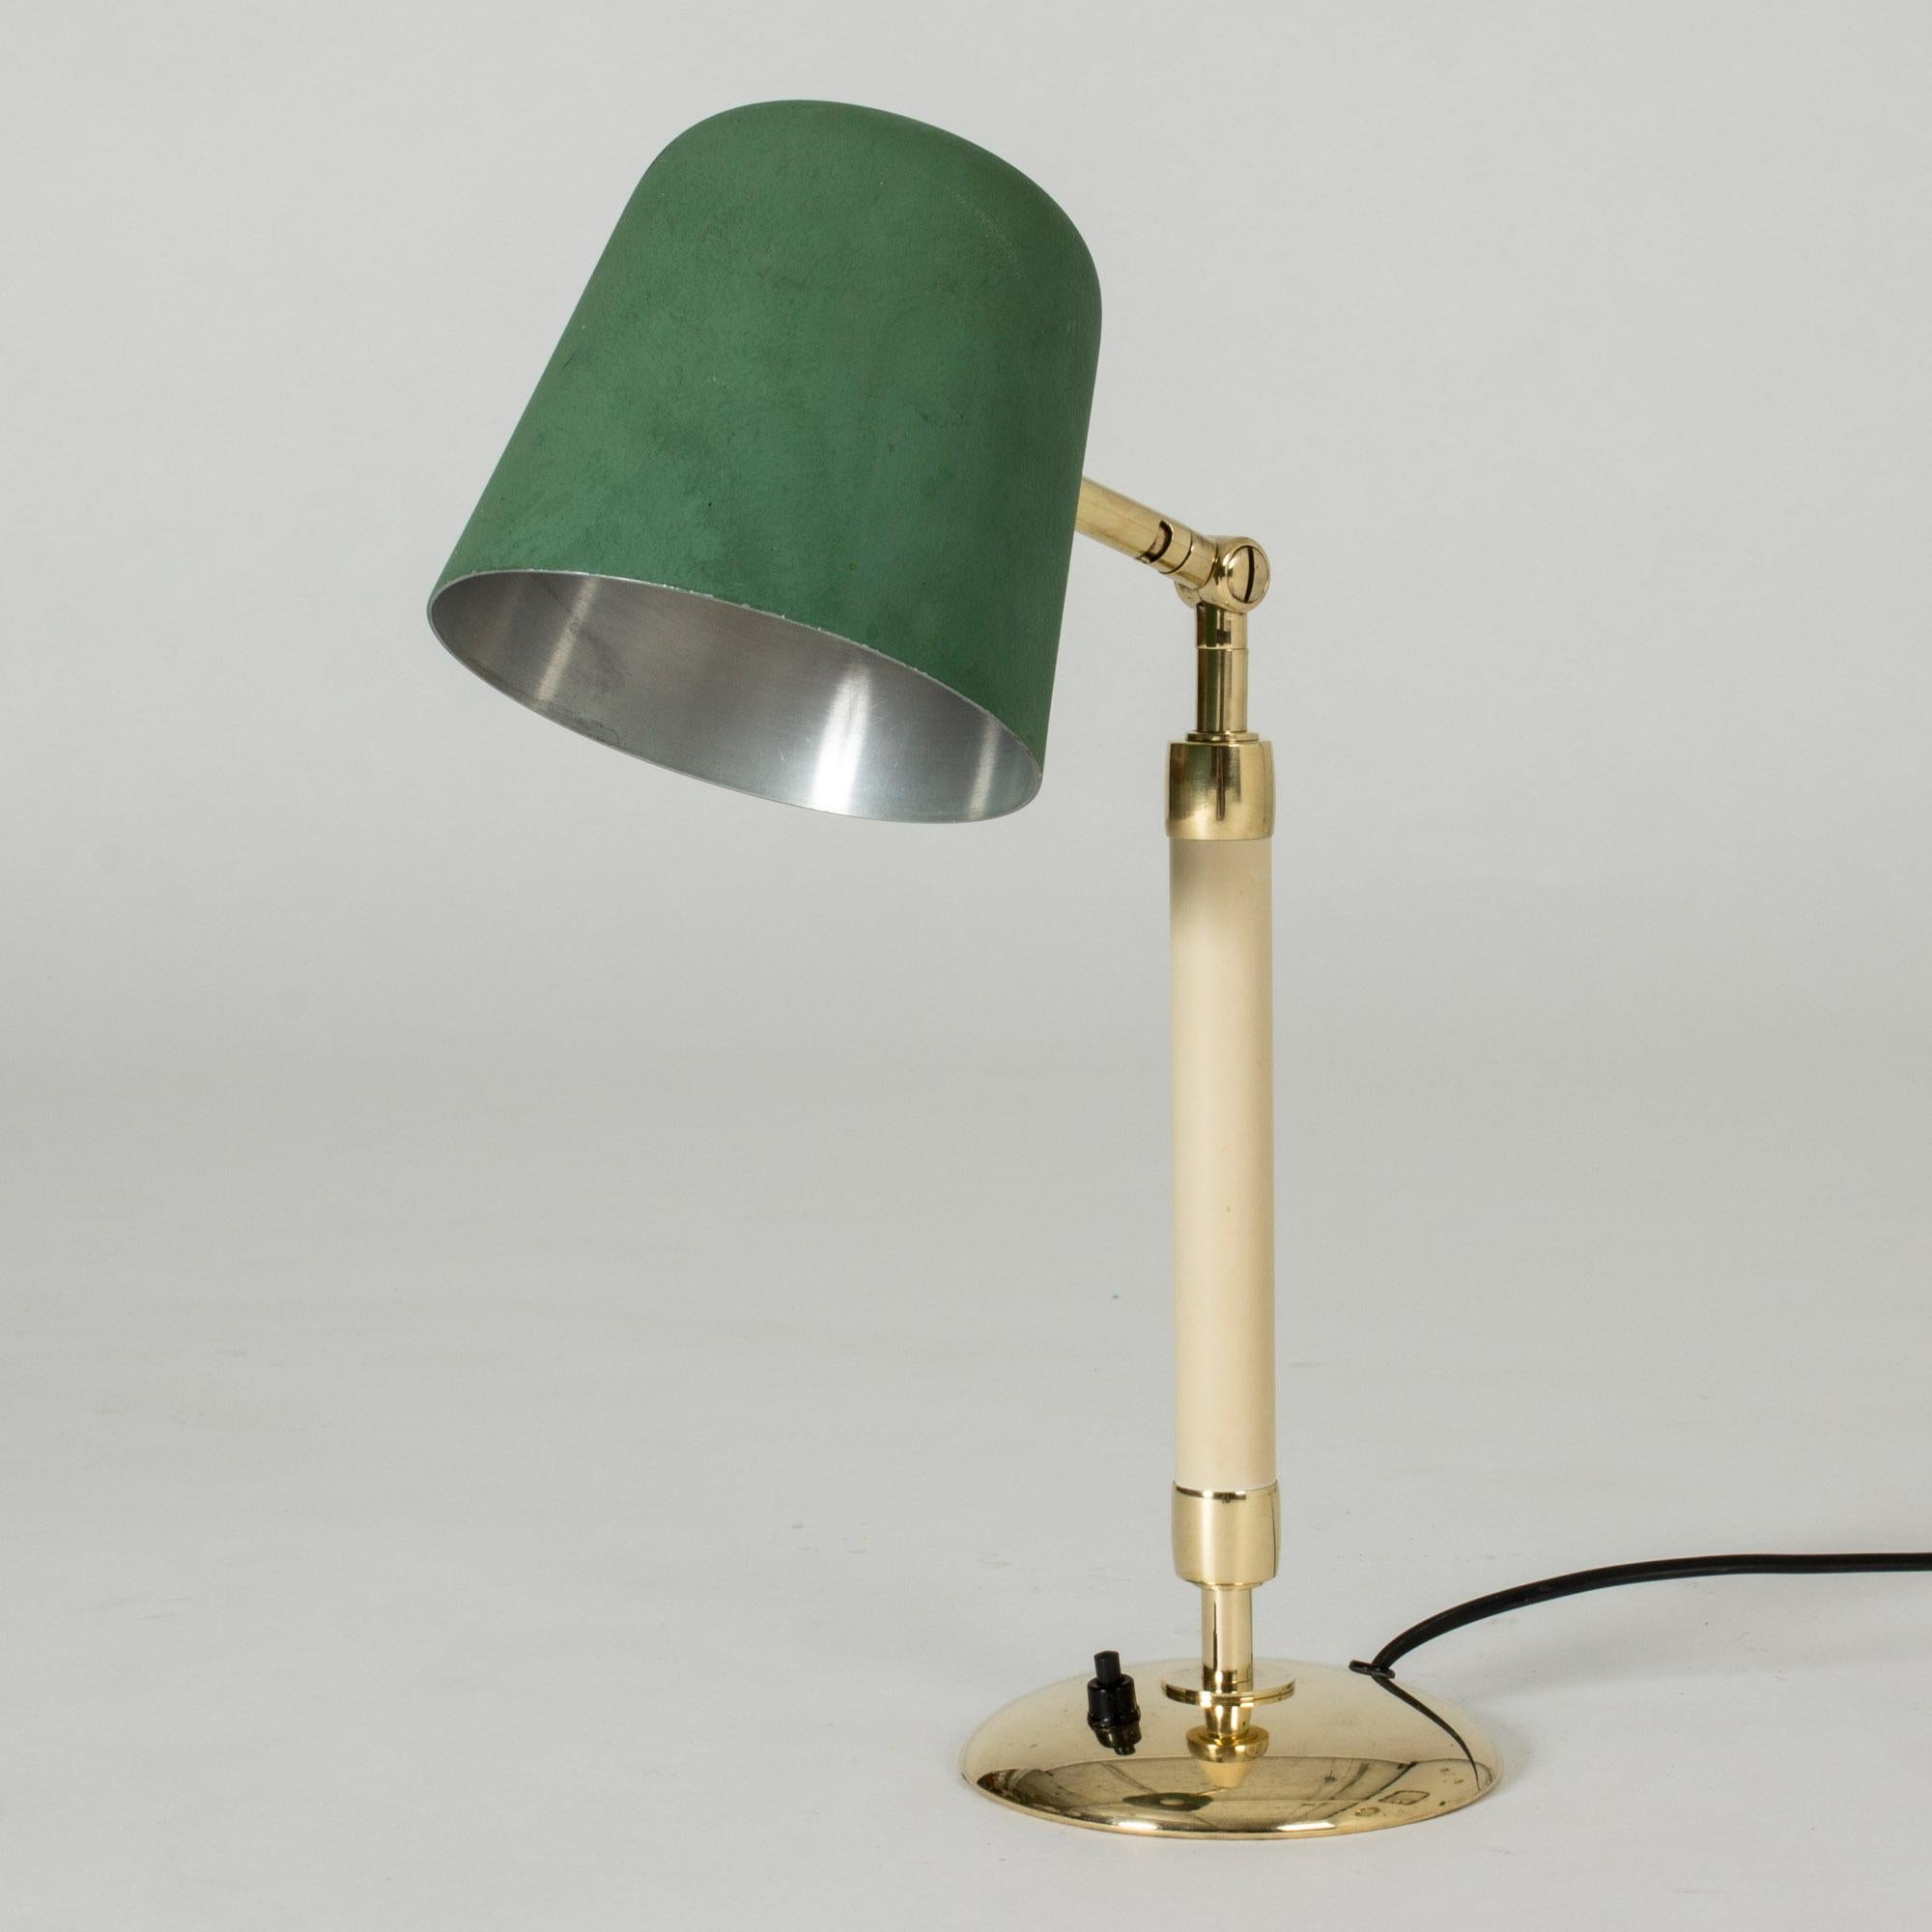 Very cool table lamp by Bertil Brisborg, with clean, rounded lines. Brass base and details, metal shade lacquered green.